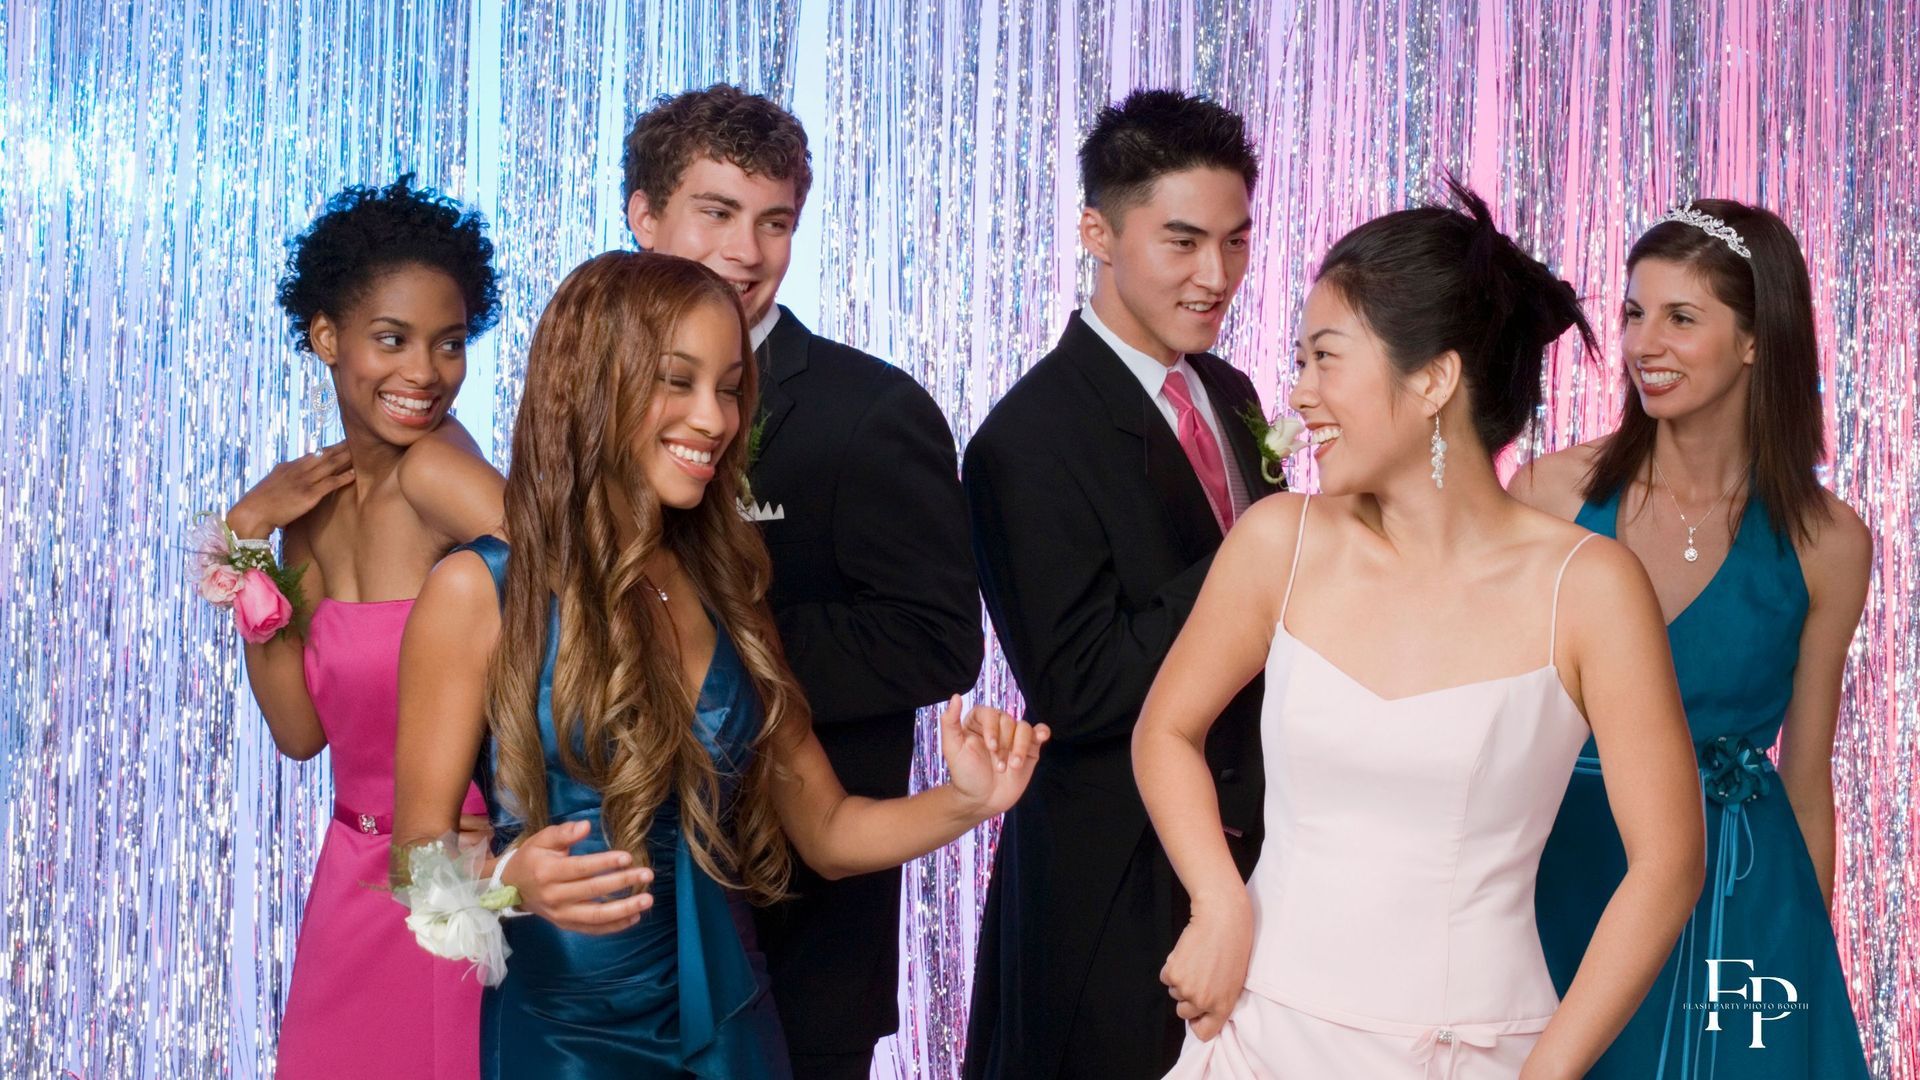 Close friends laughter and smiles at the South Austin prom.